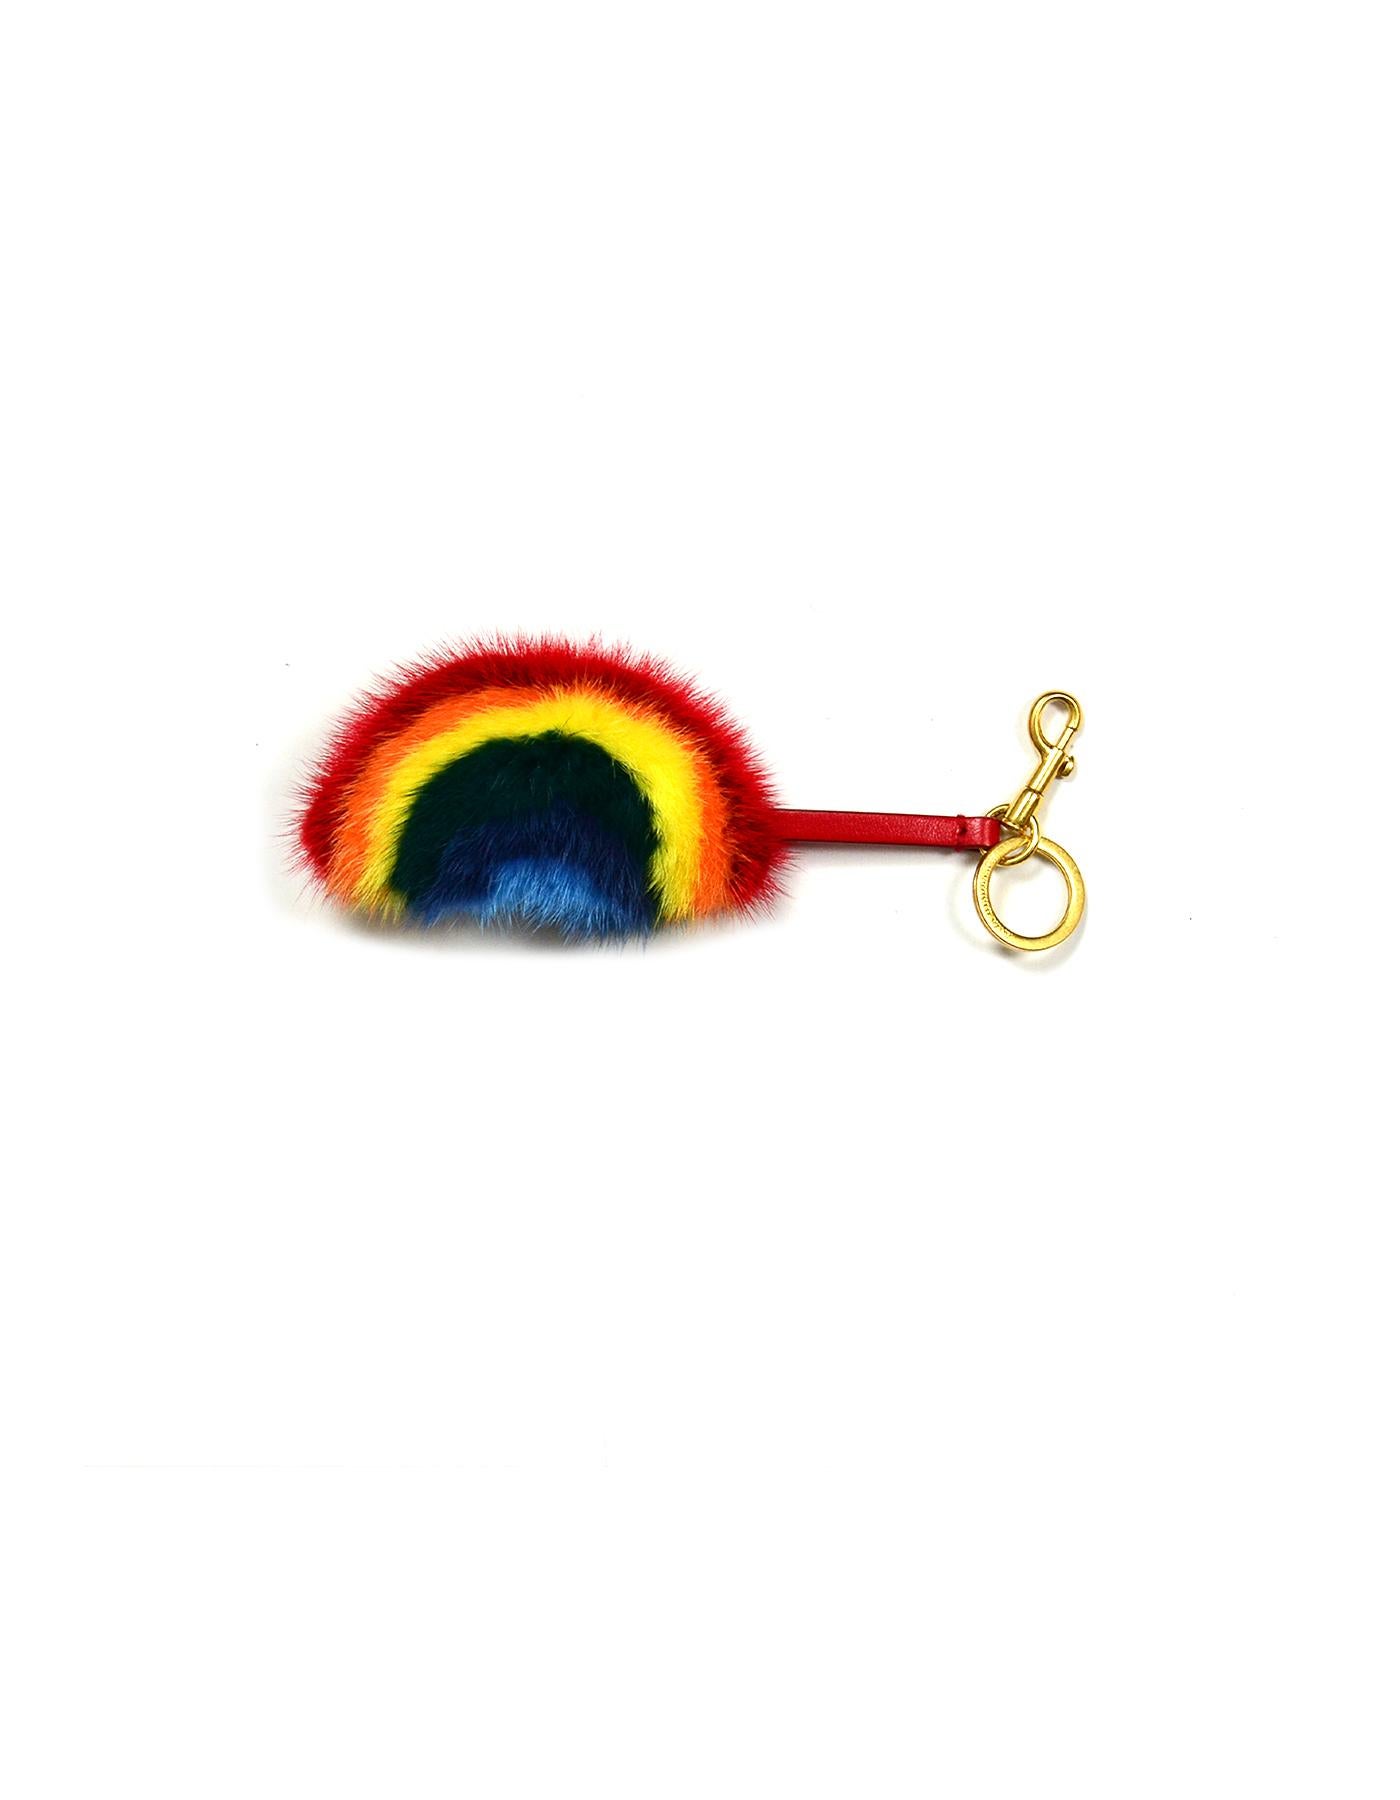 Anya Hindmarch Rainbow Mink Bag Charm

Color: Rainbow
Hardware: Goldtone
Materials: Mink Fur
Closure/Opening: Large lobster clasp
Overall Condition: Excellent pre-owned condition
Includes: Box

4.5